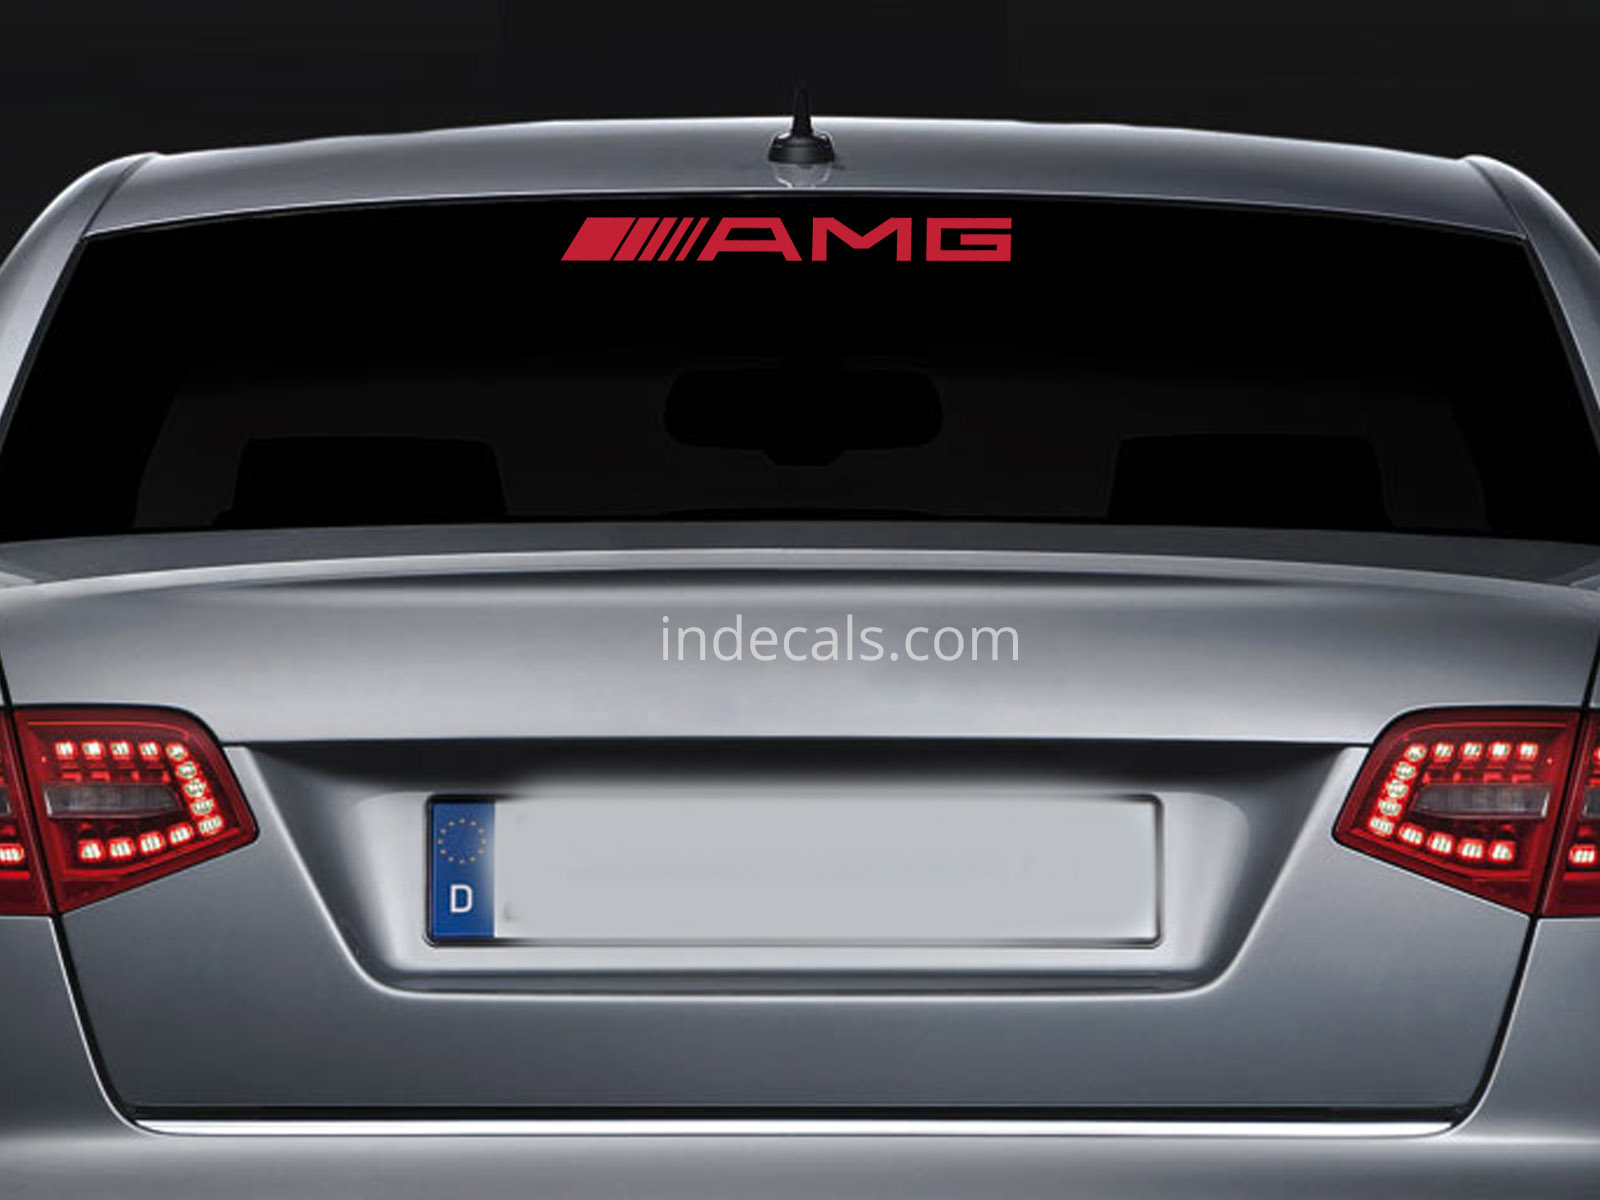 1 x AMG Sticker for Windshield or Back Window - Red